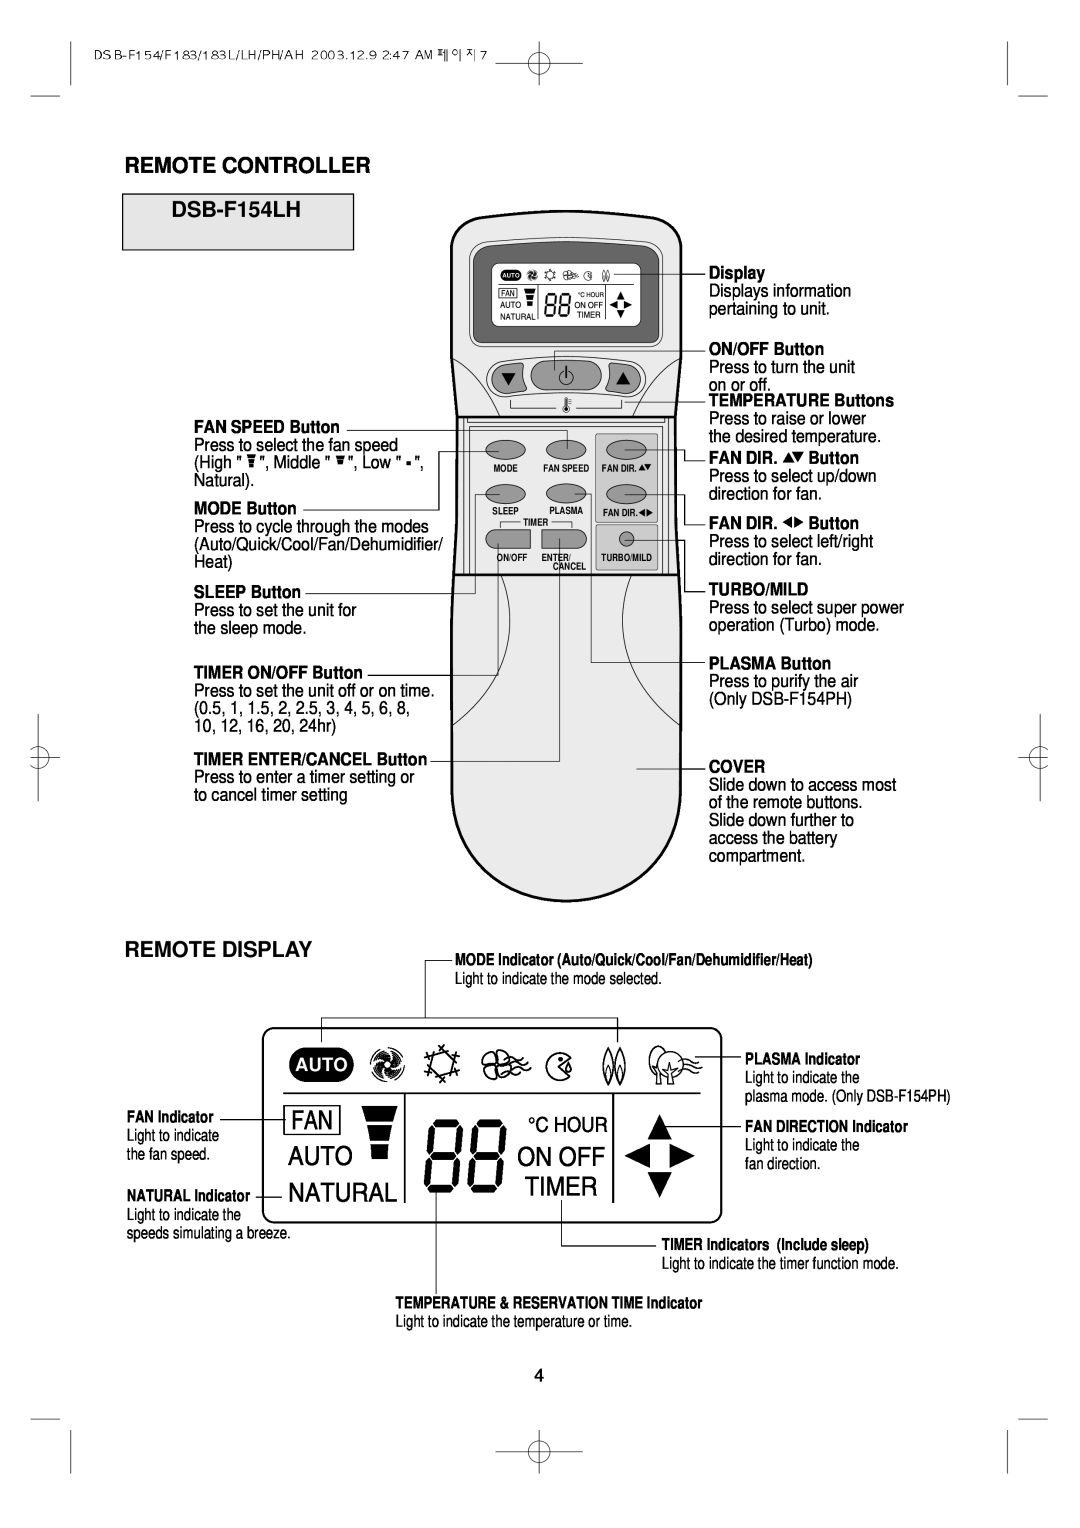 Daewoo REMOTE CONTROLLER DSB-F154LH, Remote Display, FAN SPEED Button, MODE Button, SLEEP Button, TIMER ON/OFF Button 